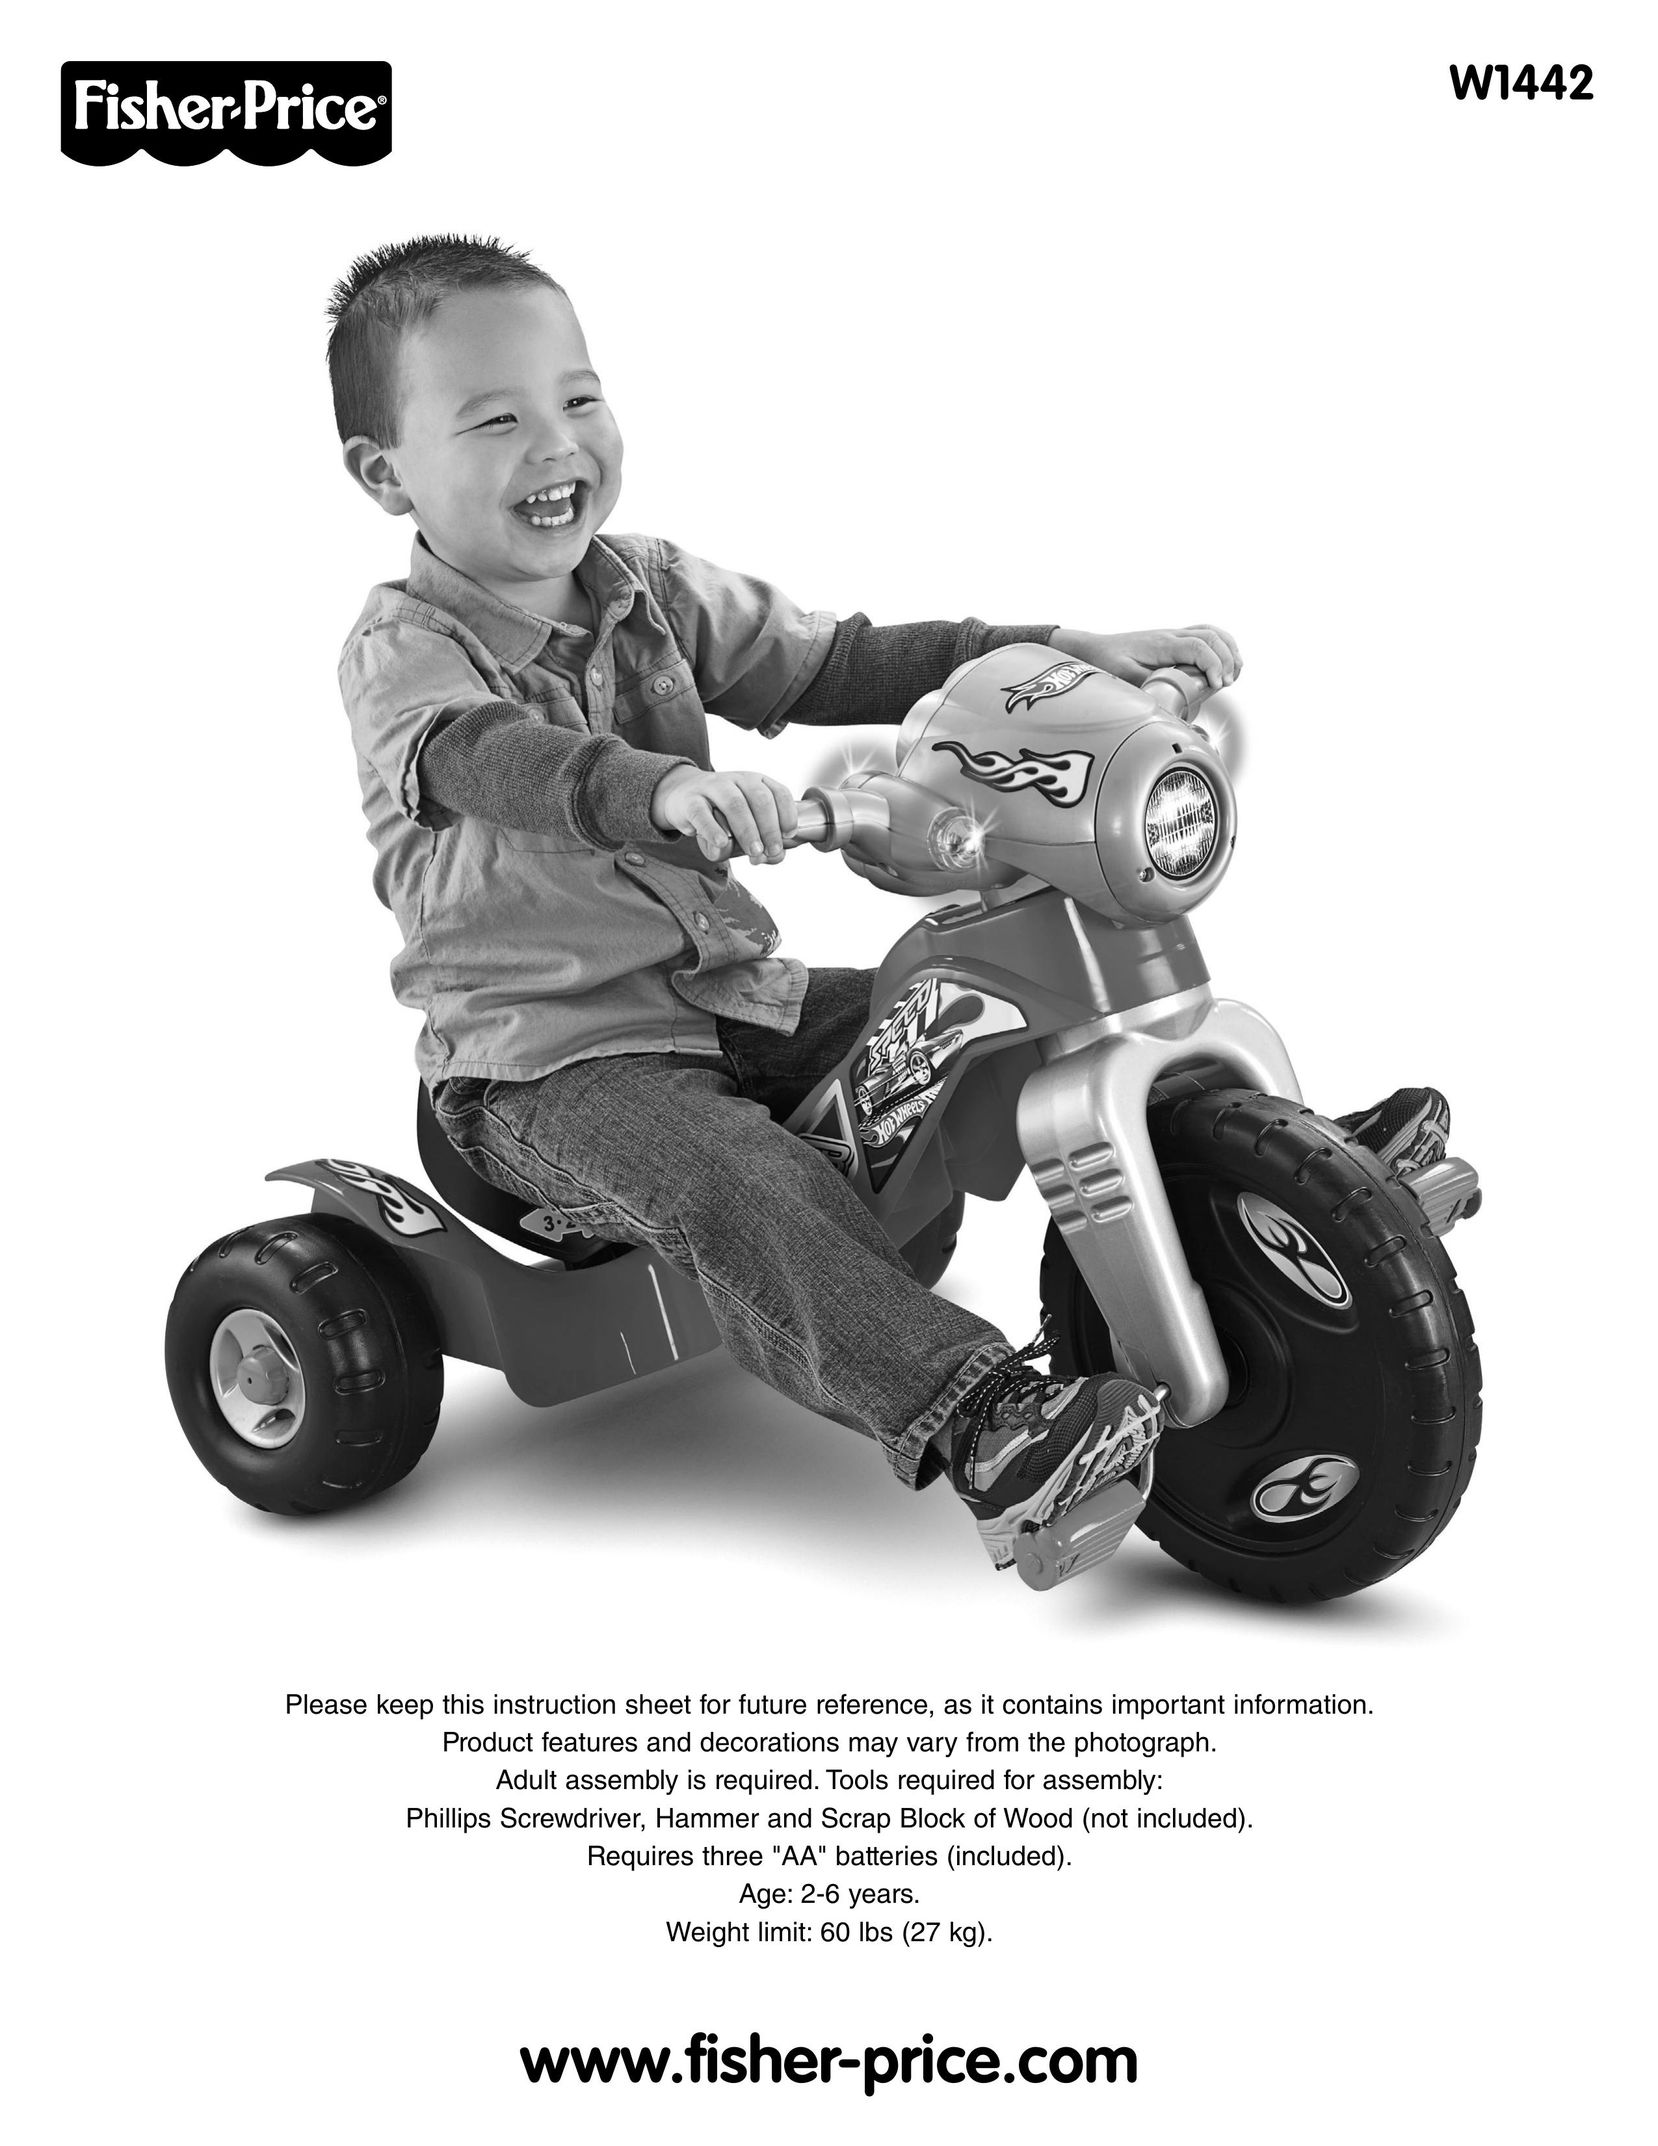 Fisher-Price W1442 Riding Toy User Manual